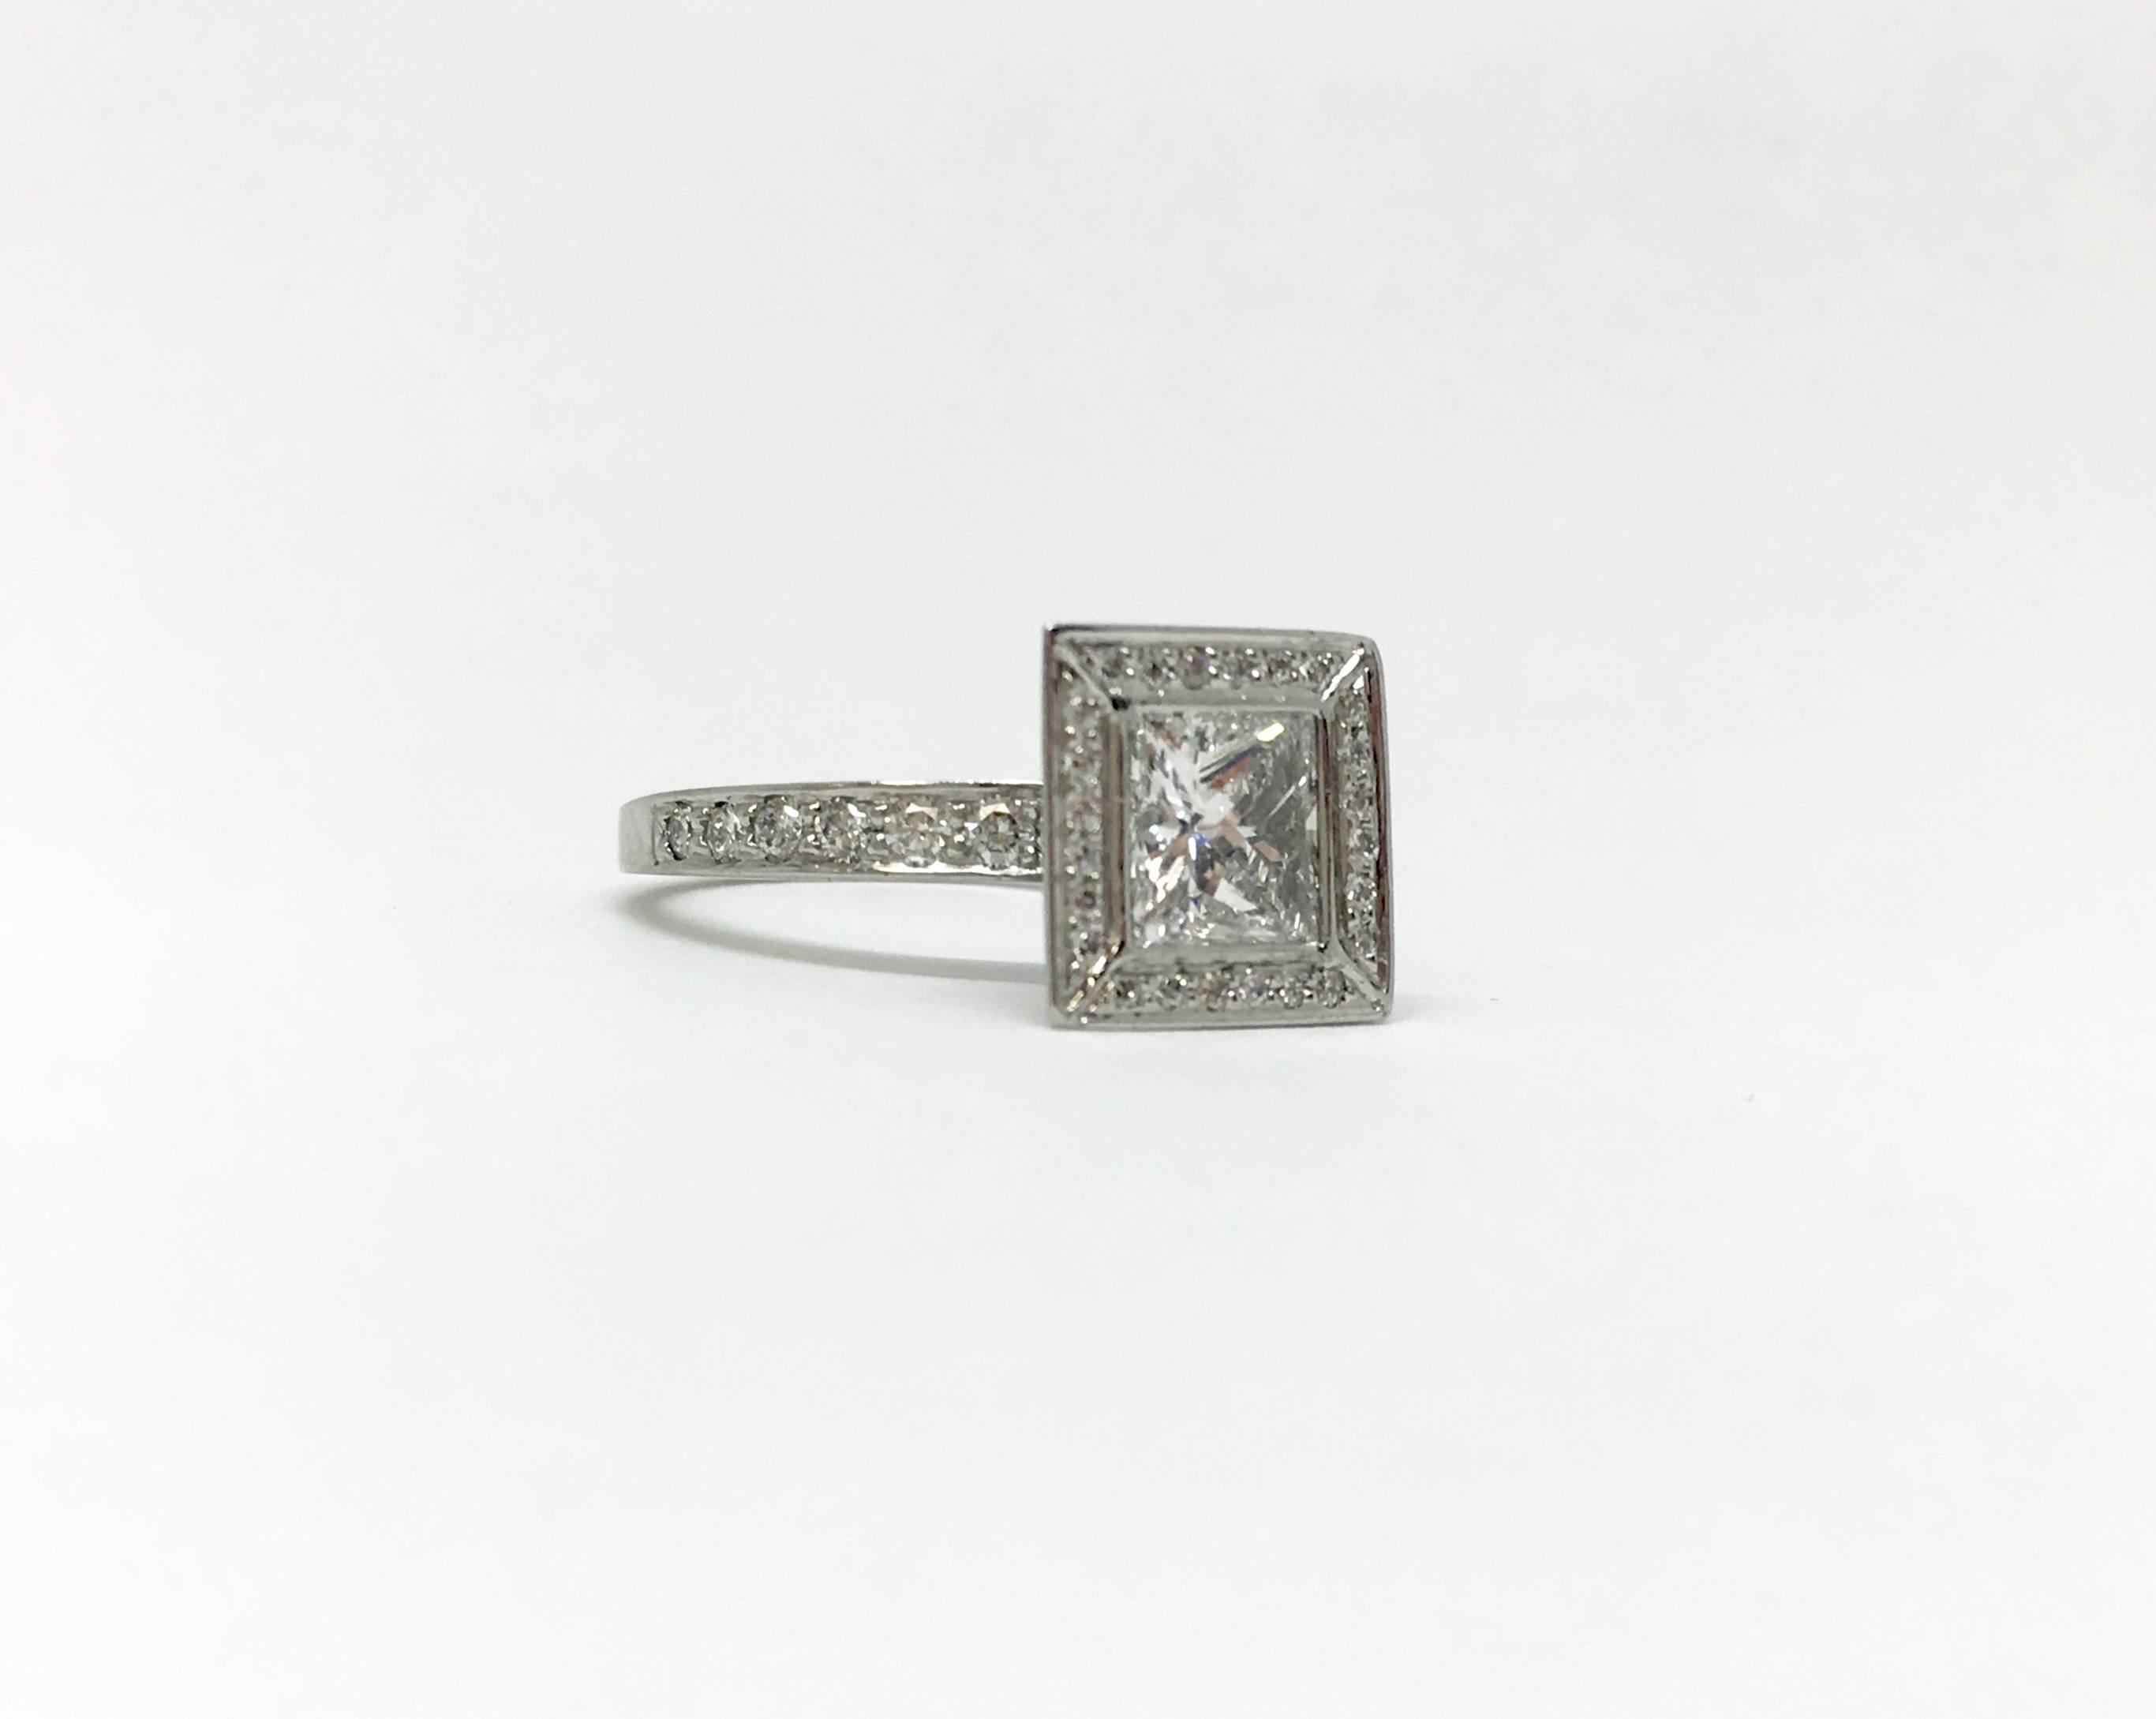 Chris Correia designed princess diamond ring in platinum. The center princess cut diamond is 1.00 carat SI1 clarity, GH colour. It is detailed beautifully with 90 surrounding round brilliant cut diamonds totaling .43 carats. The finger size is